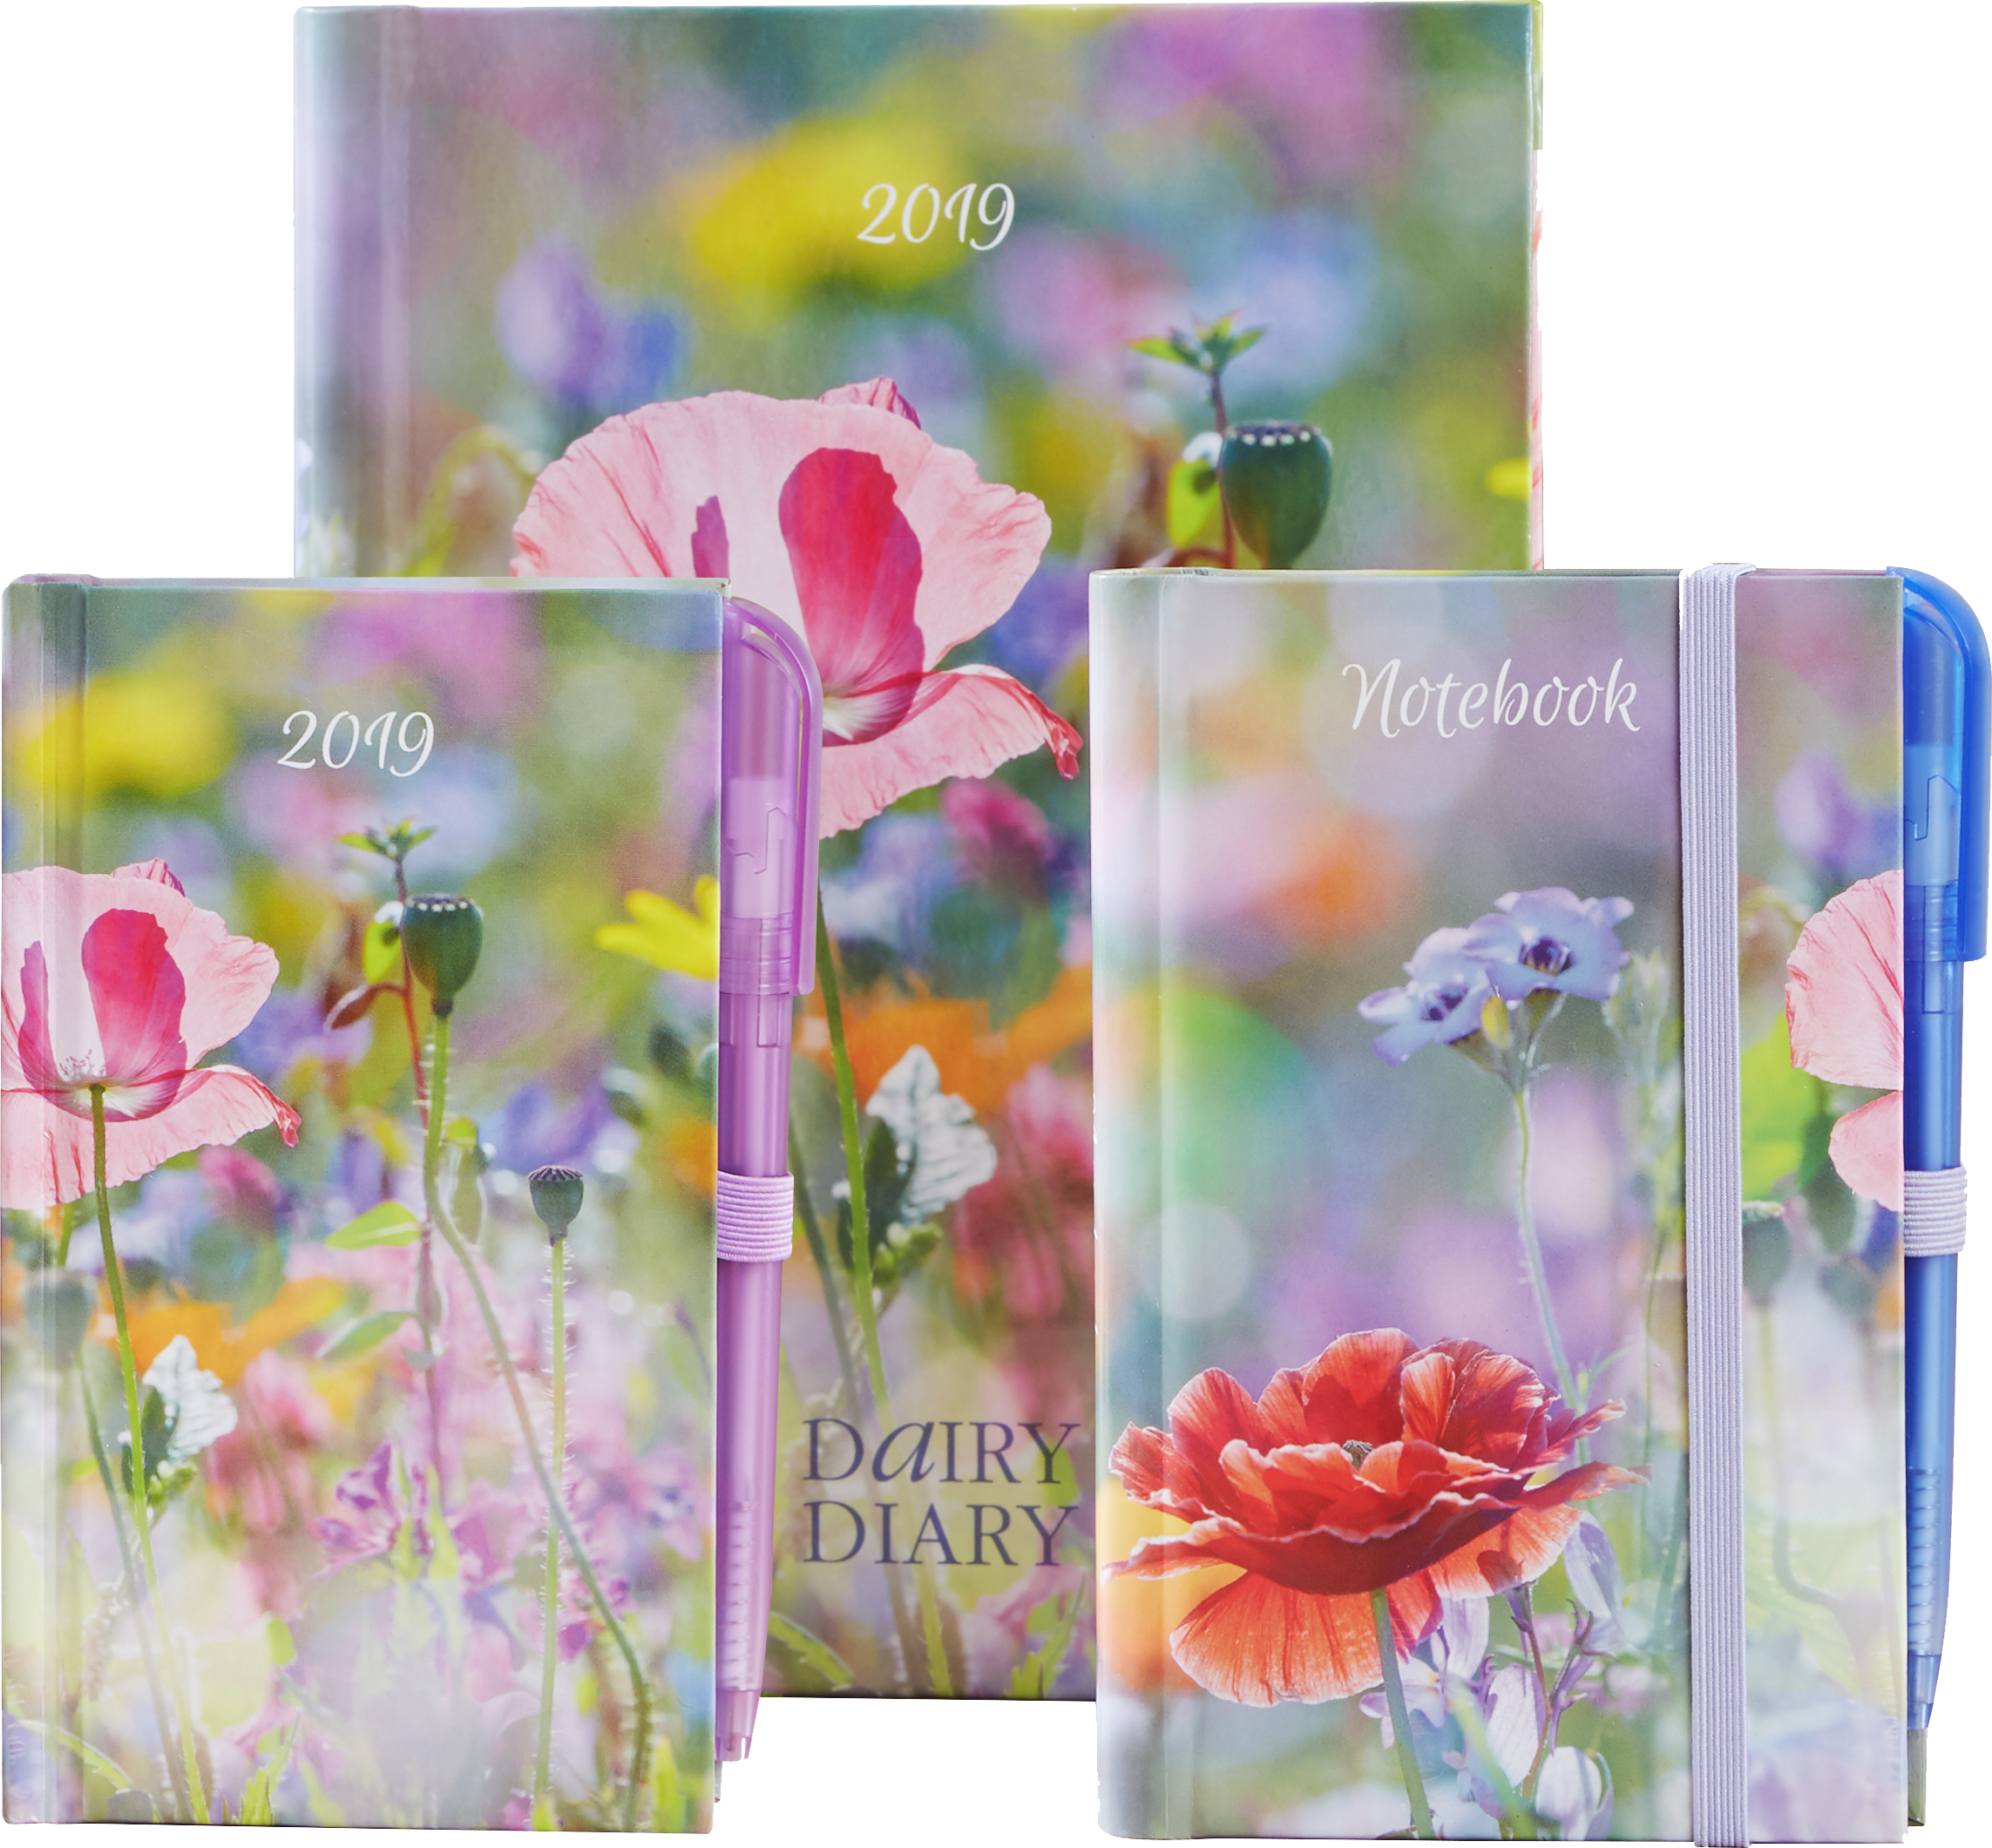 Britain's Favourite Home Diary - Otto Küchenrückwand Fixy Summer Meadow, Bunt, 220 Cm (2286x2121), Png Download